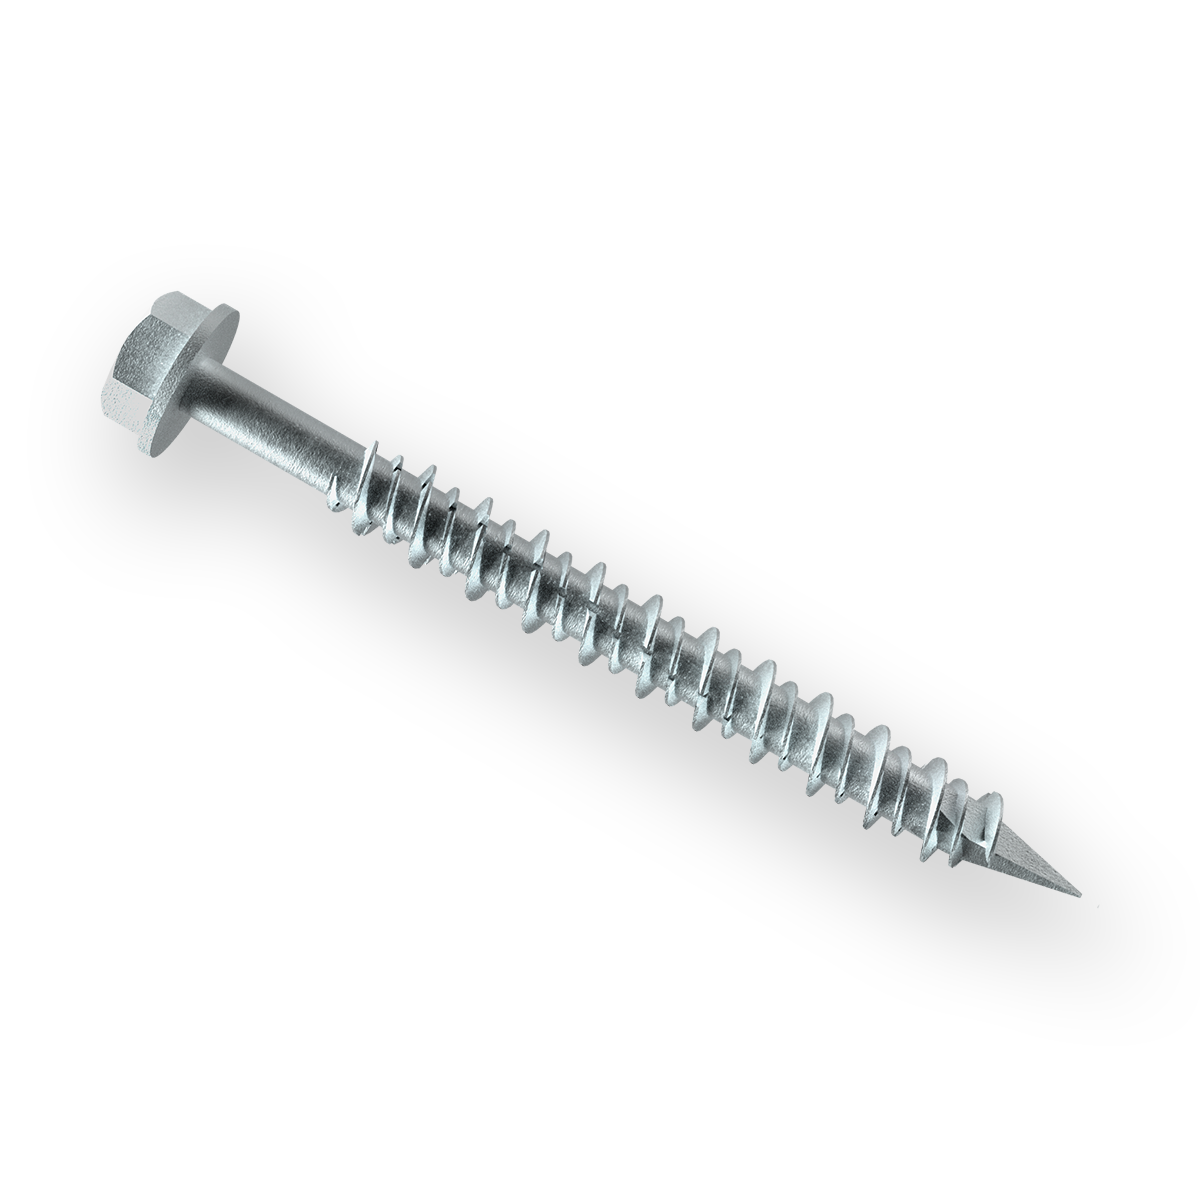 Wej-Con™ Concrete Screws- Hex Washer Head: 410 Stainless Steel with Silver R-Blocker Coating Mechanical Anchors Wej-It